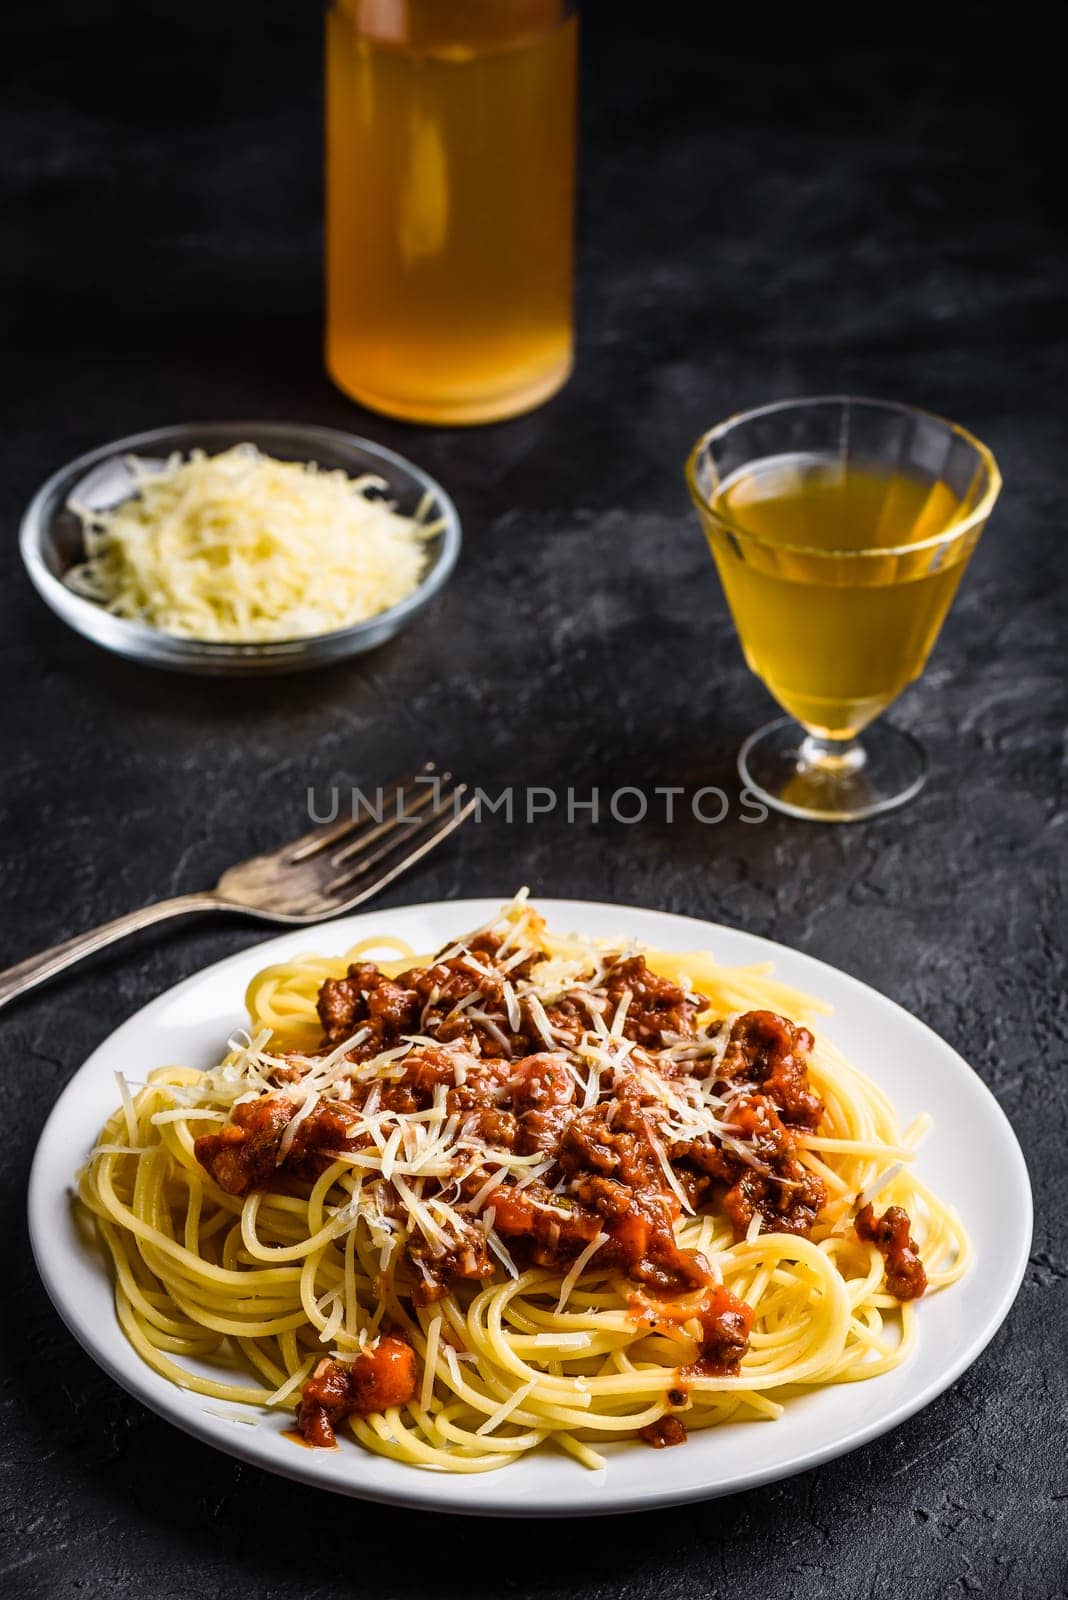 Spaghetti with bolognese sauce and grated parmesan cheese